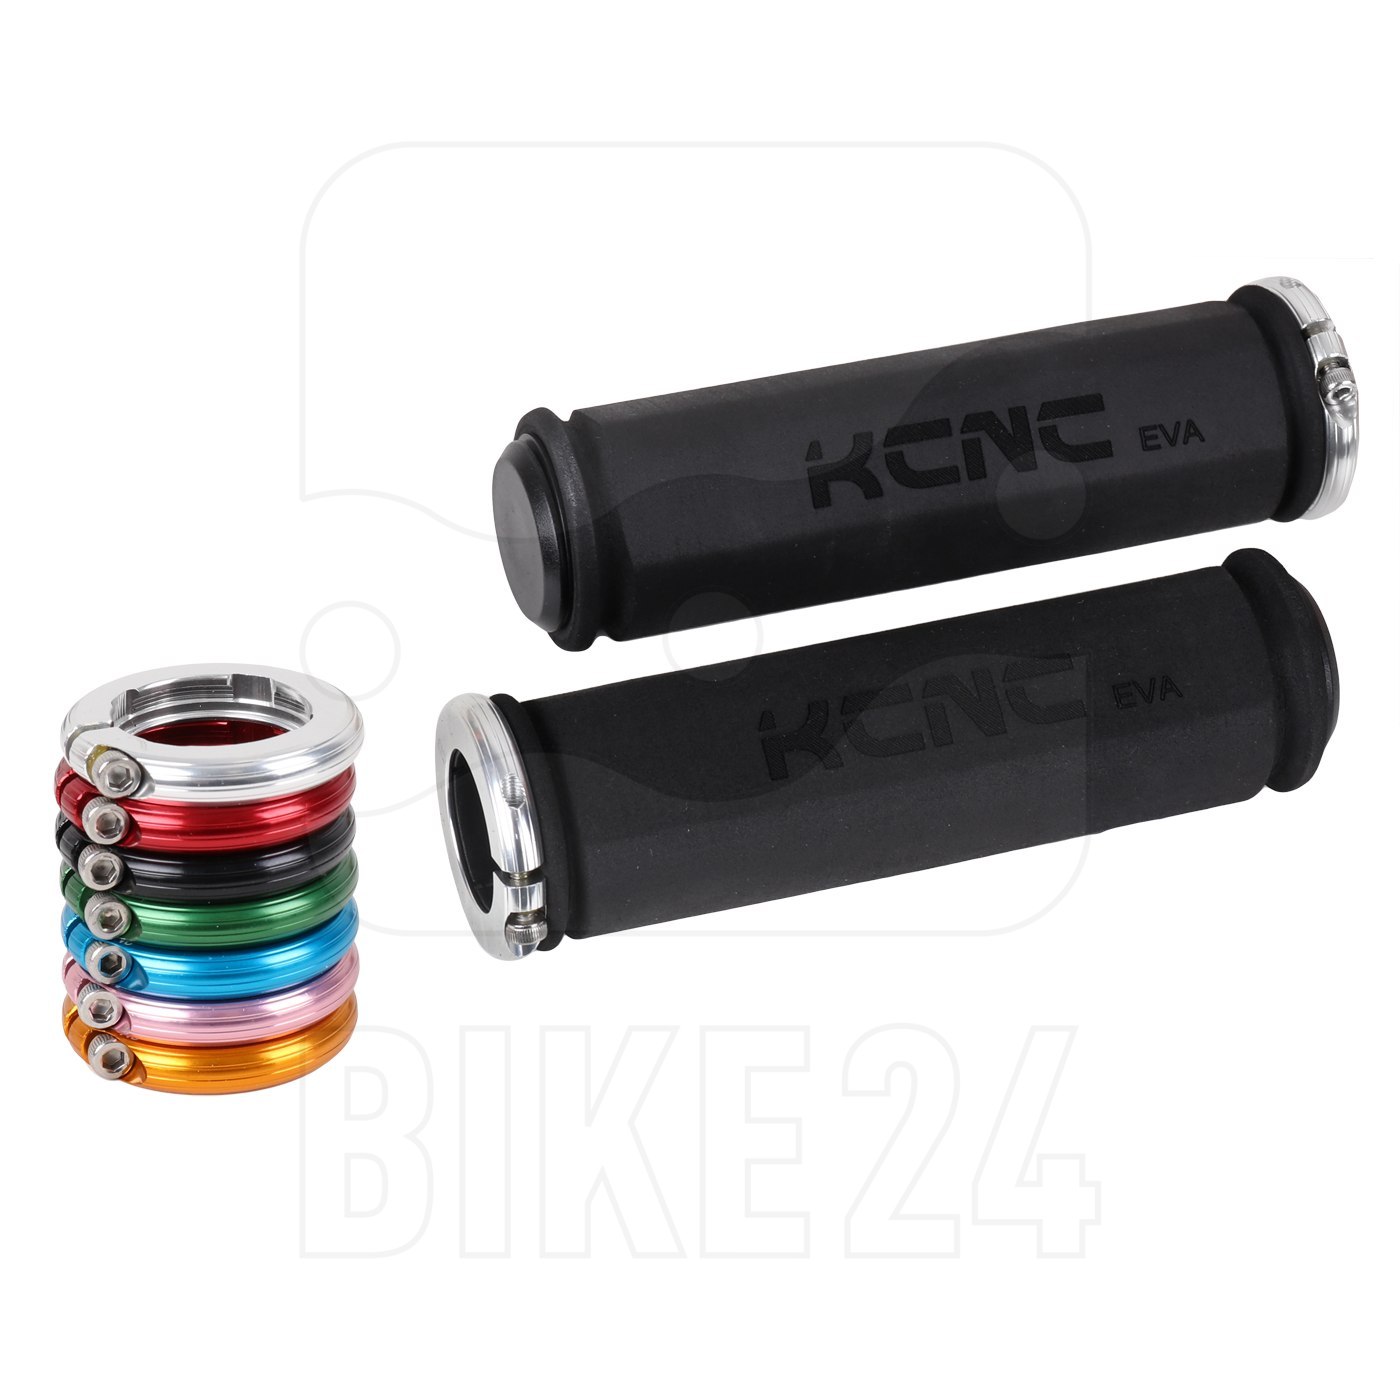 Picture of KCNC Lock-on Bar Grips with Lockring - black/colored